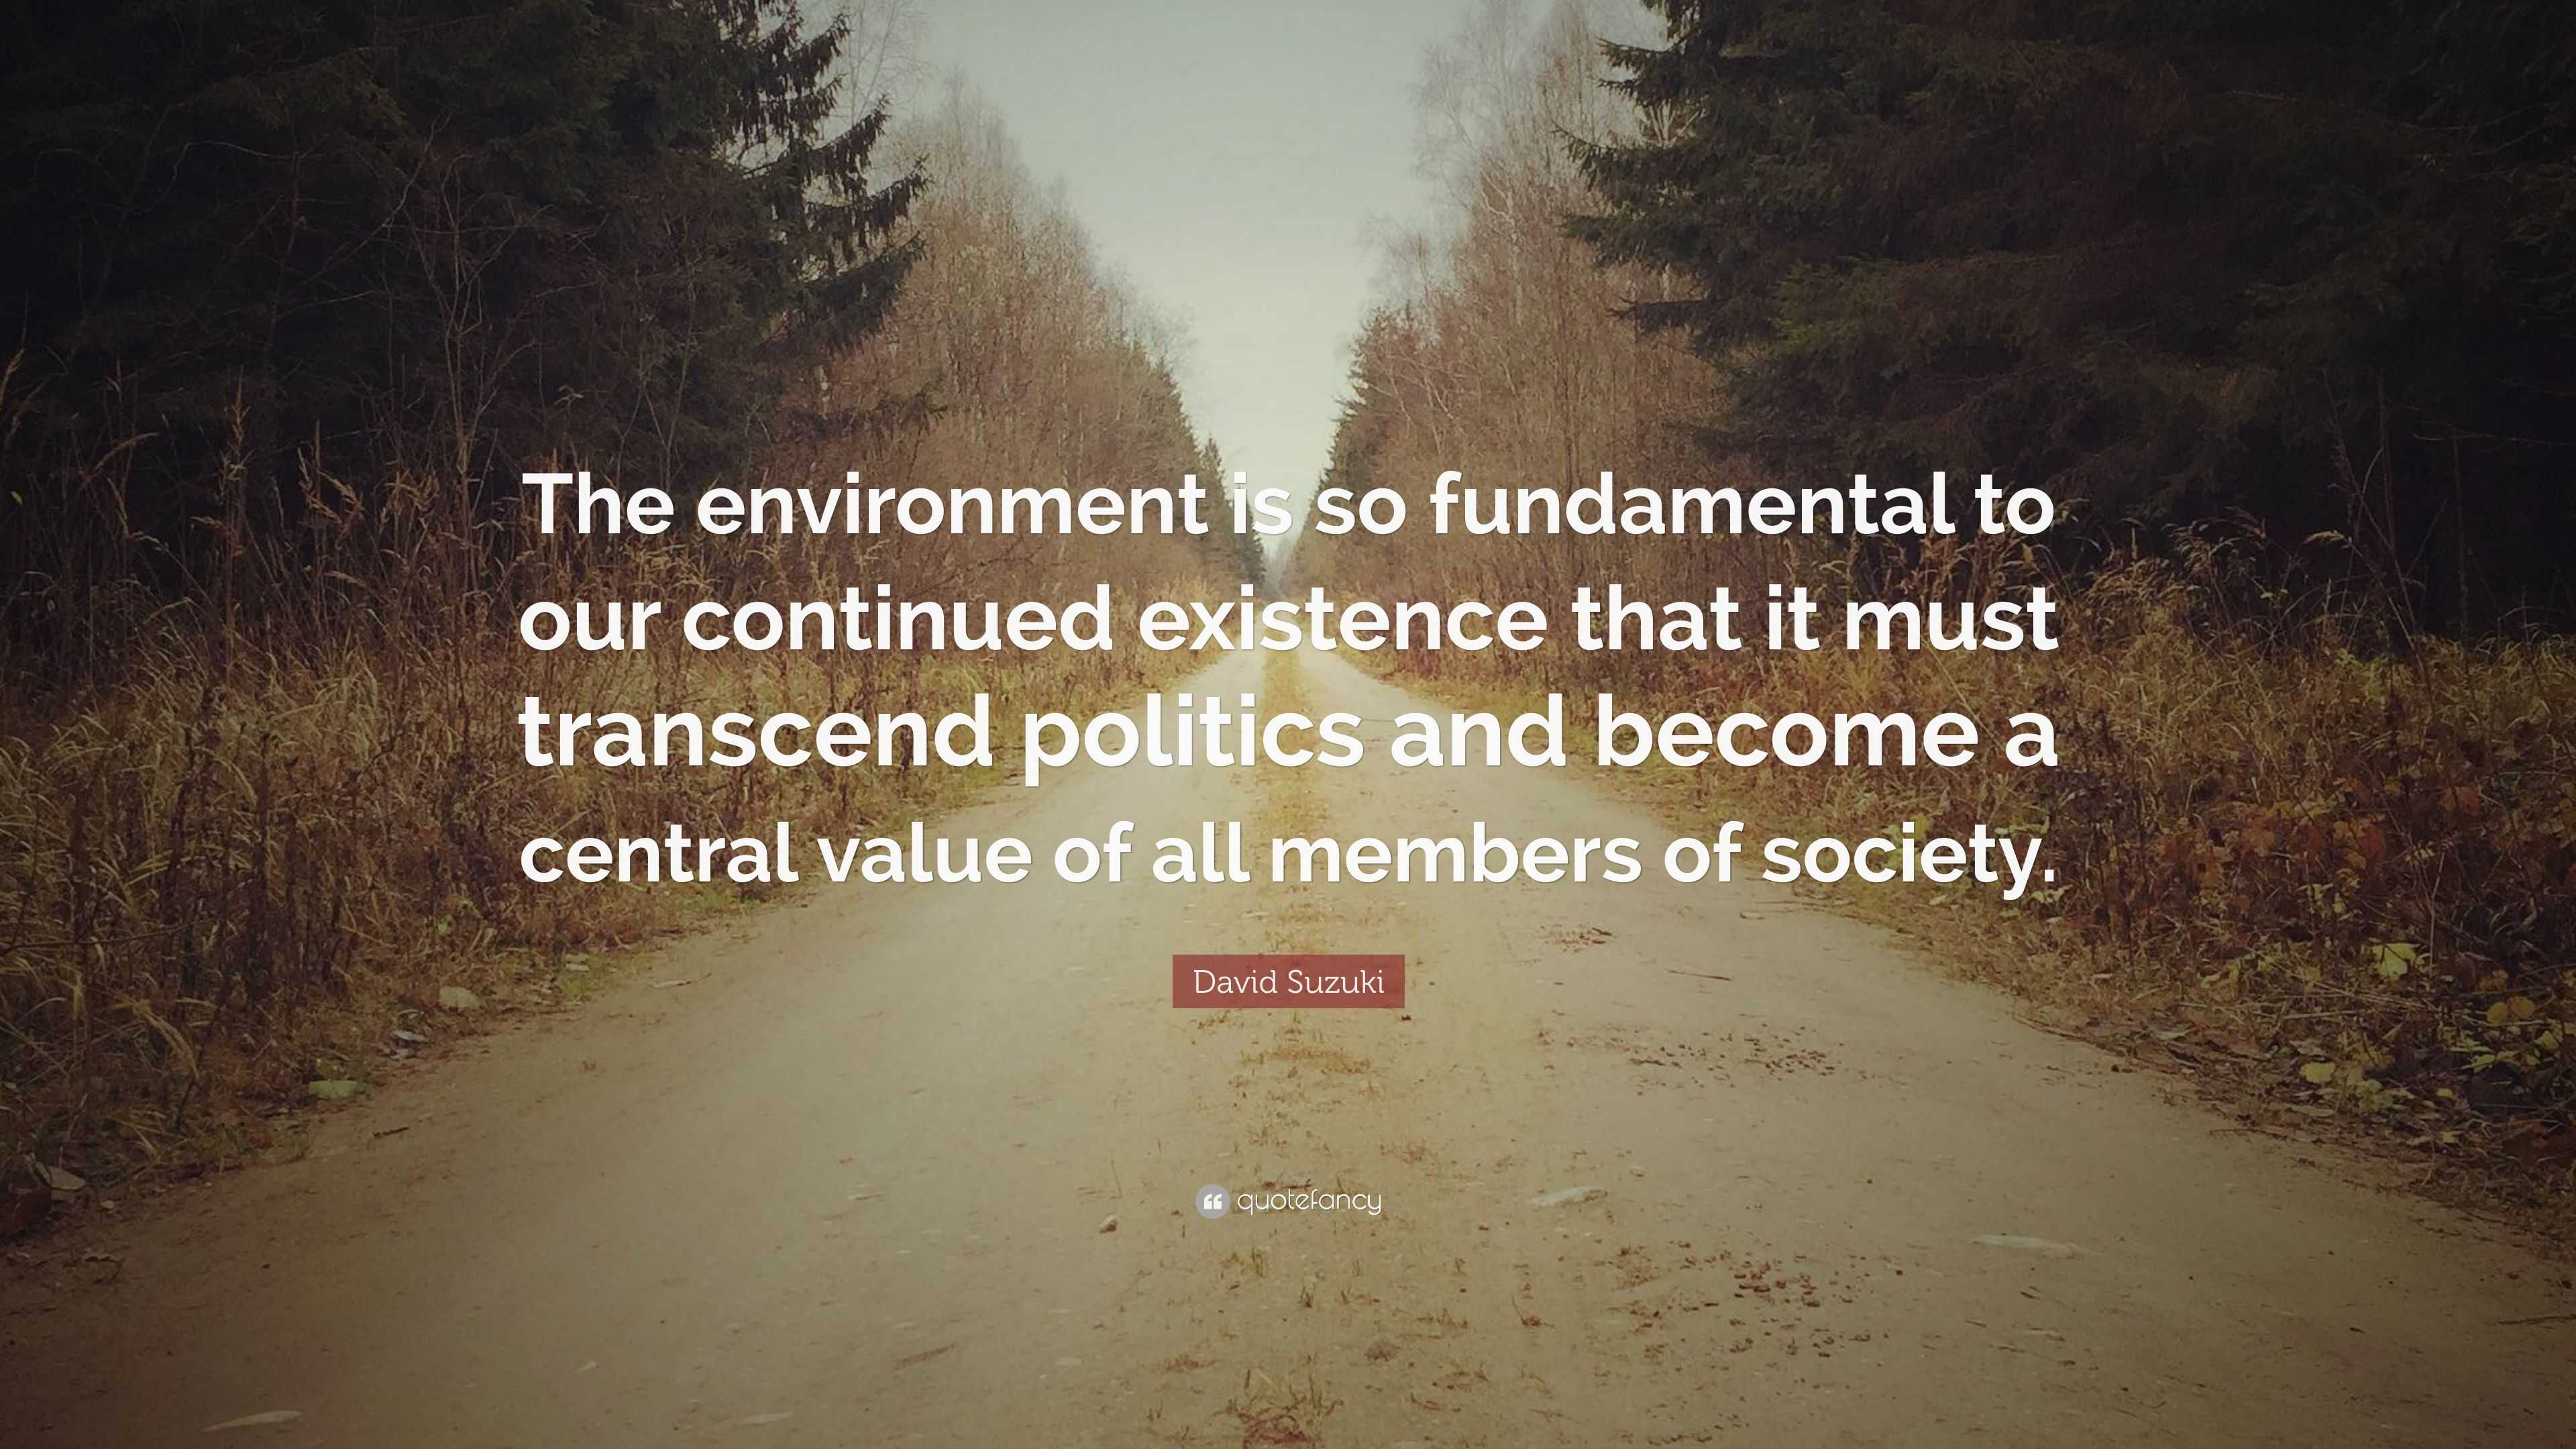 David Suzuki Quote: “The environment is so fundamental to our continued